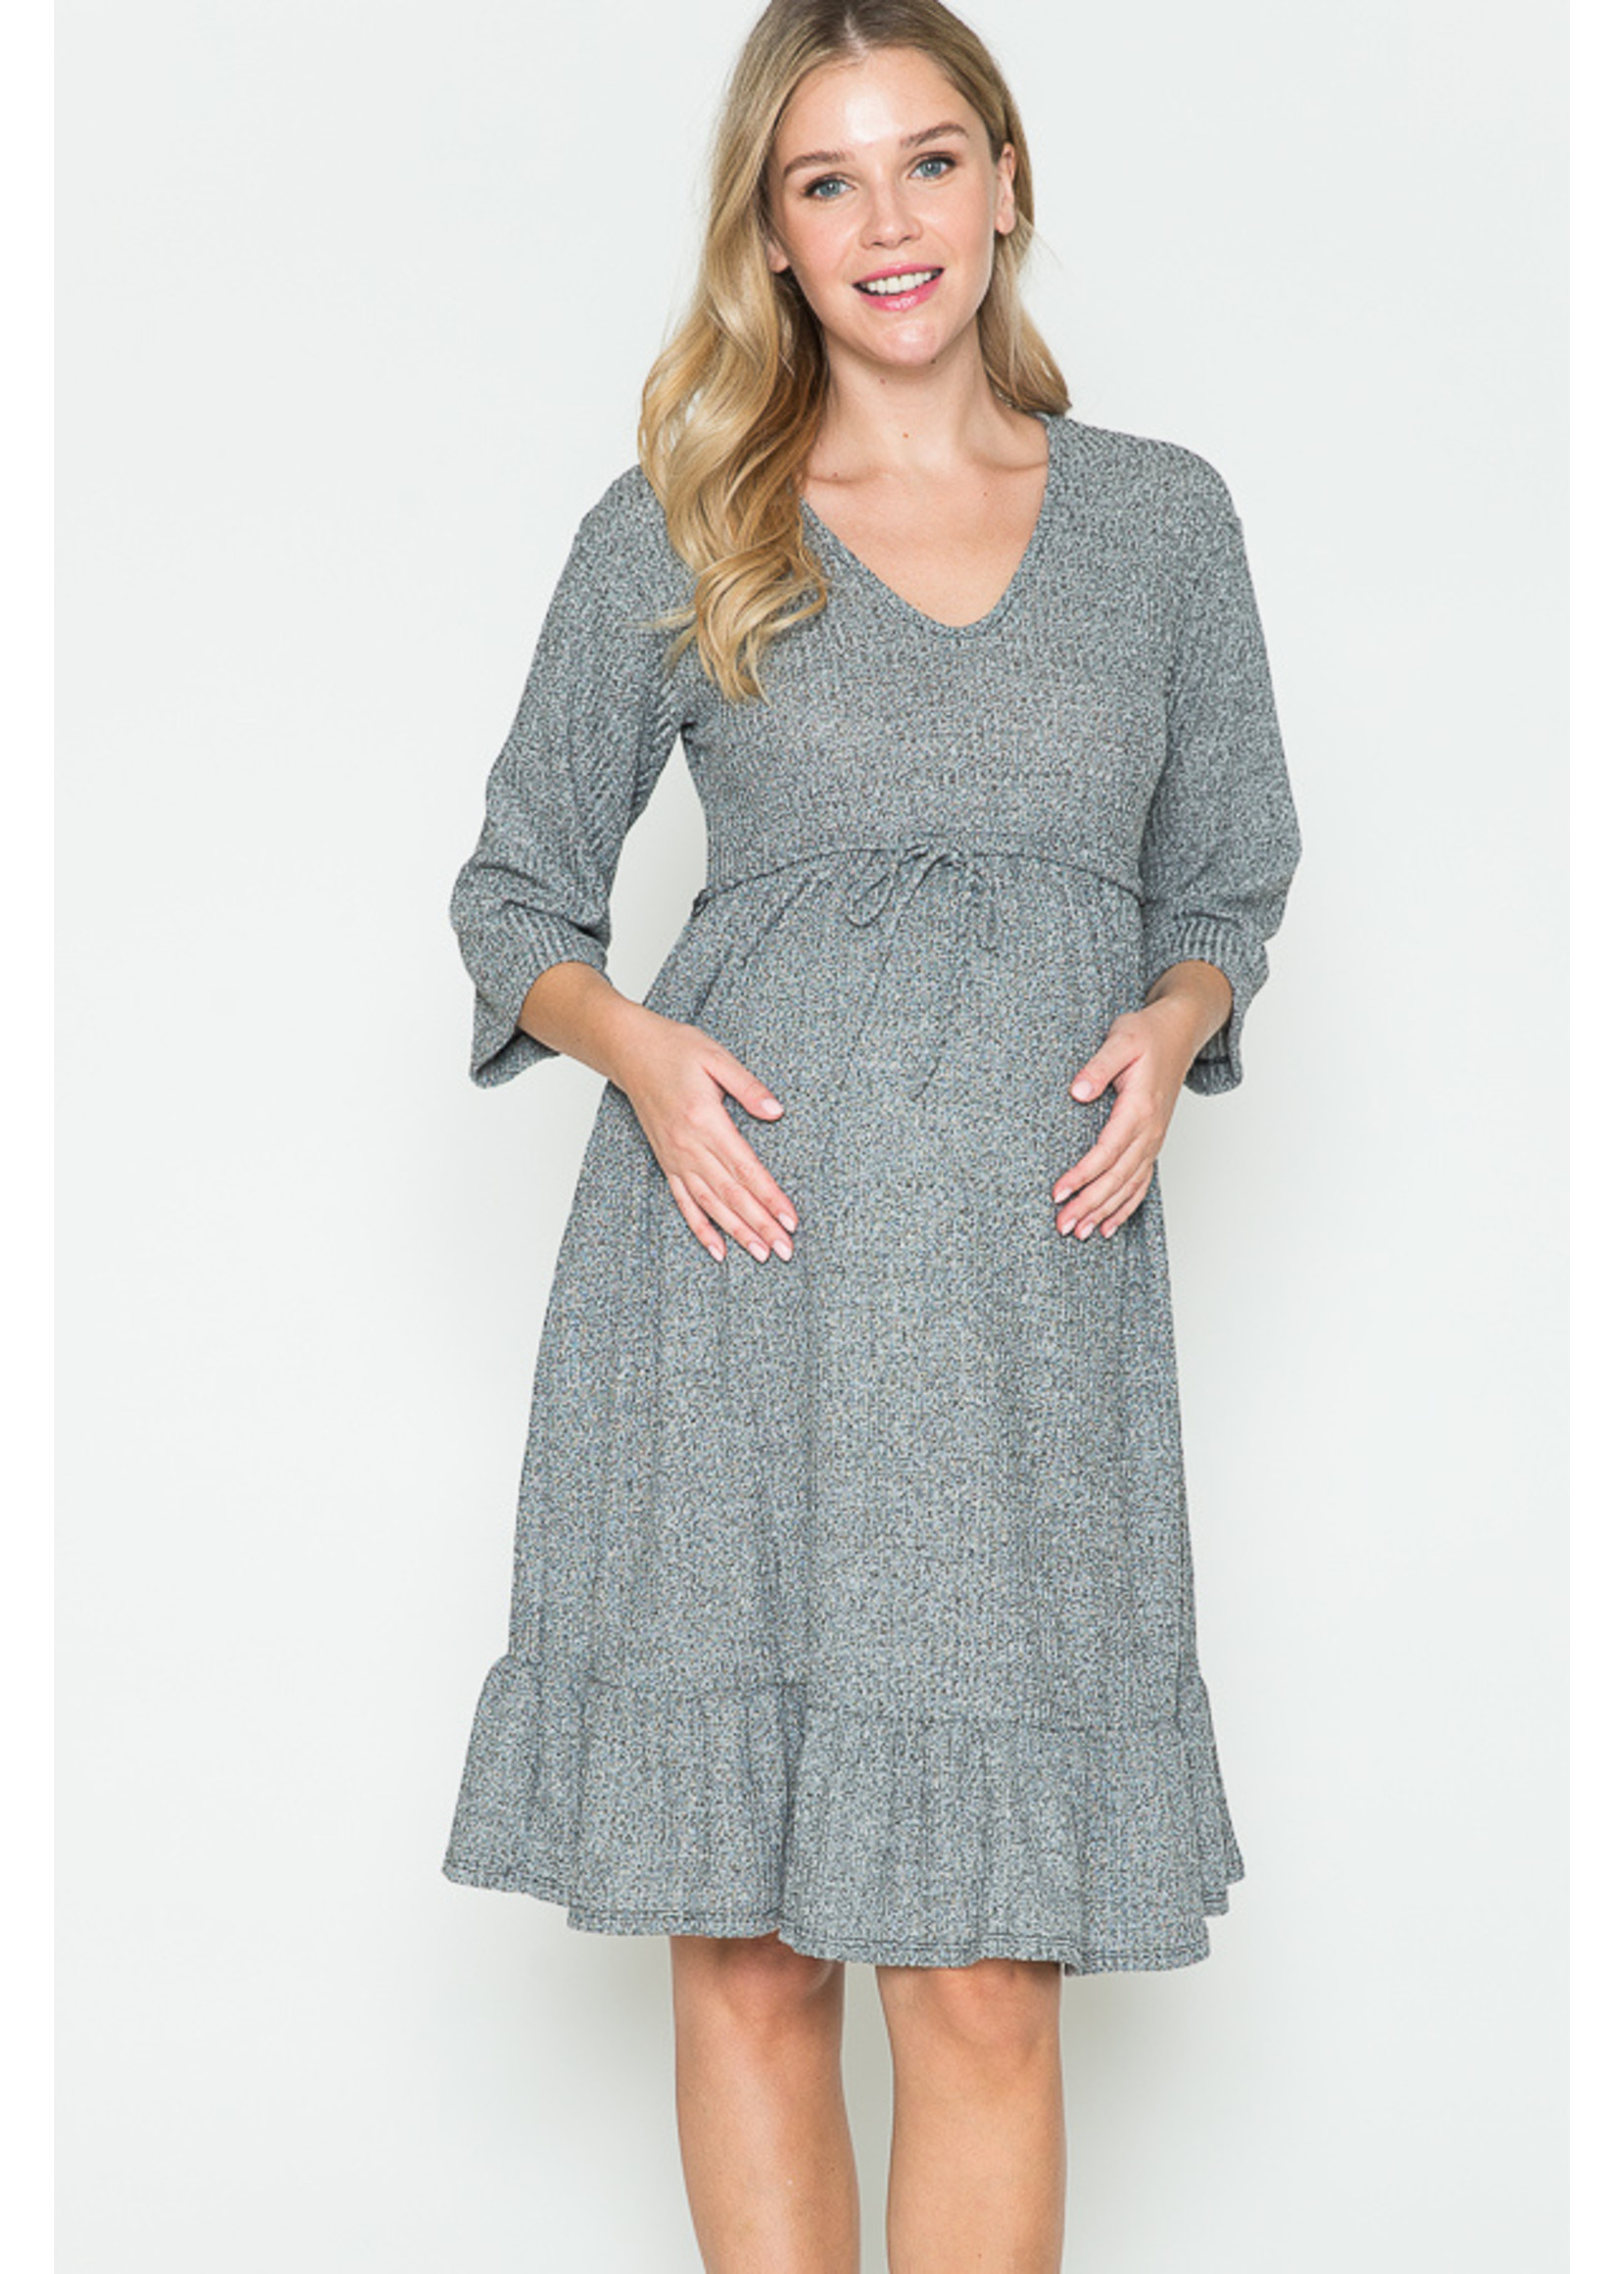 Querential Maternity Maternity 3/4 SL Babydoll Tiered Midi Dress